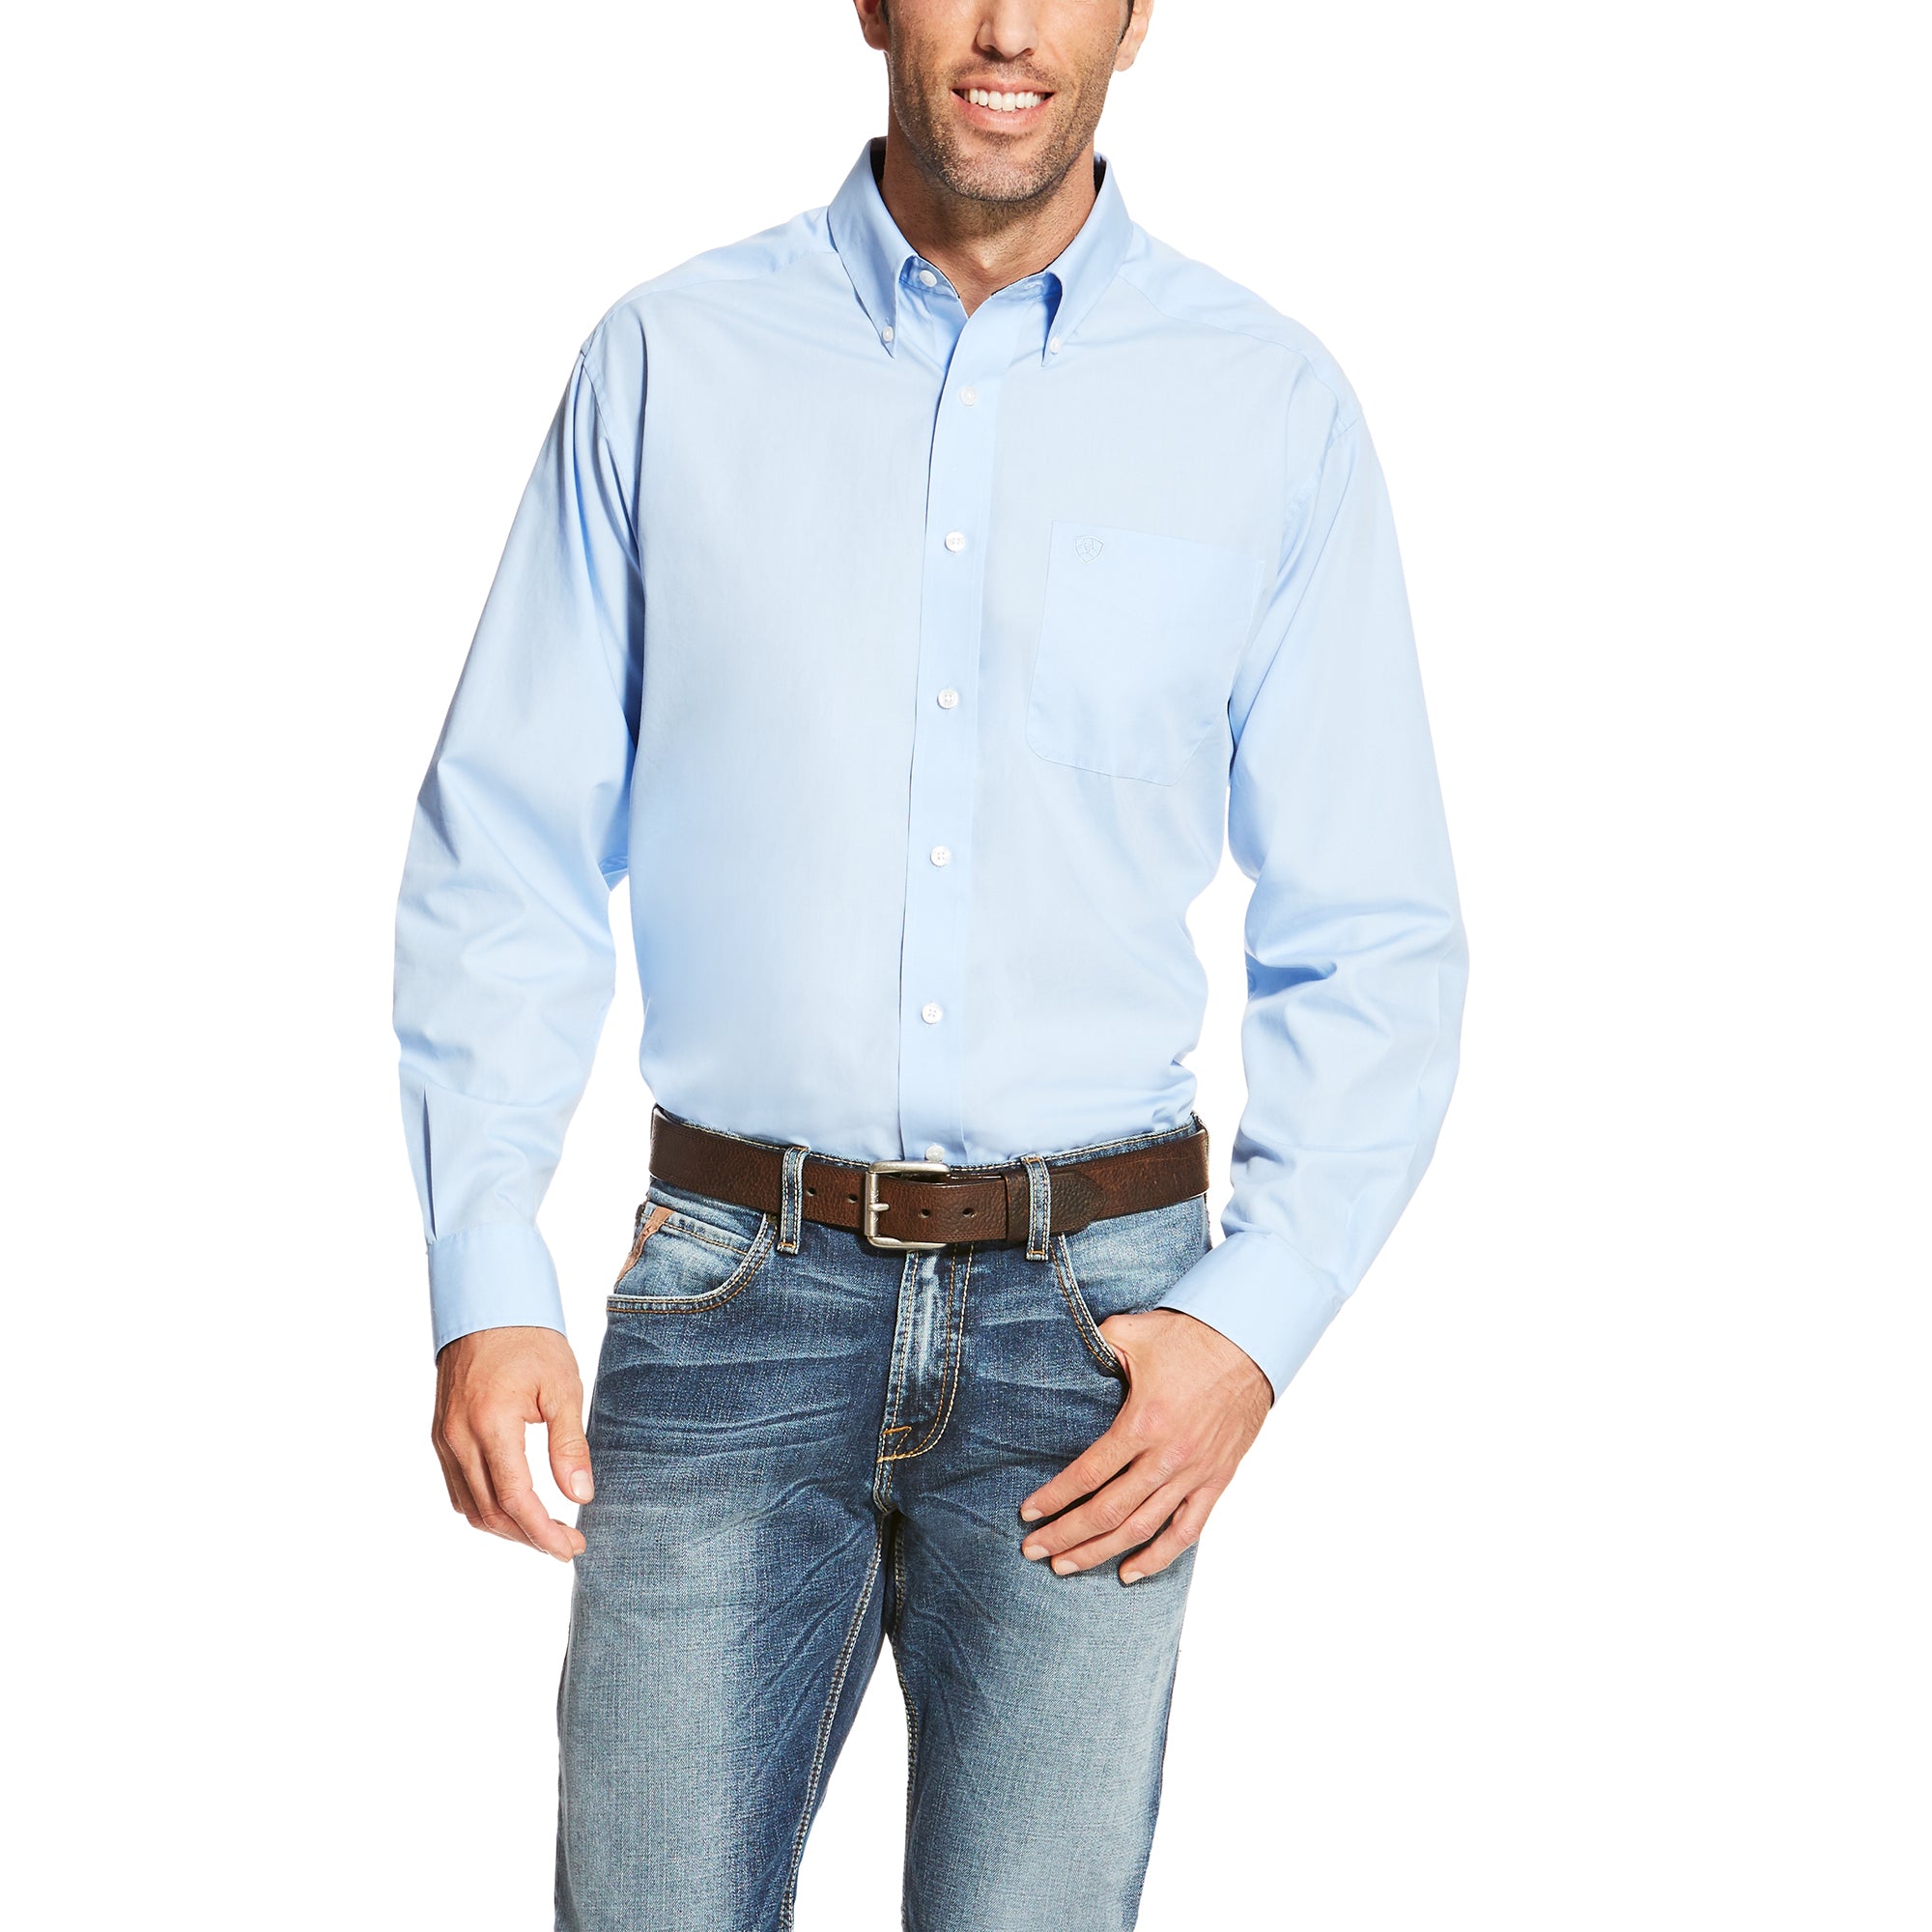 Ariat Wrinkle Free Solid Shirt